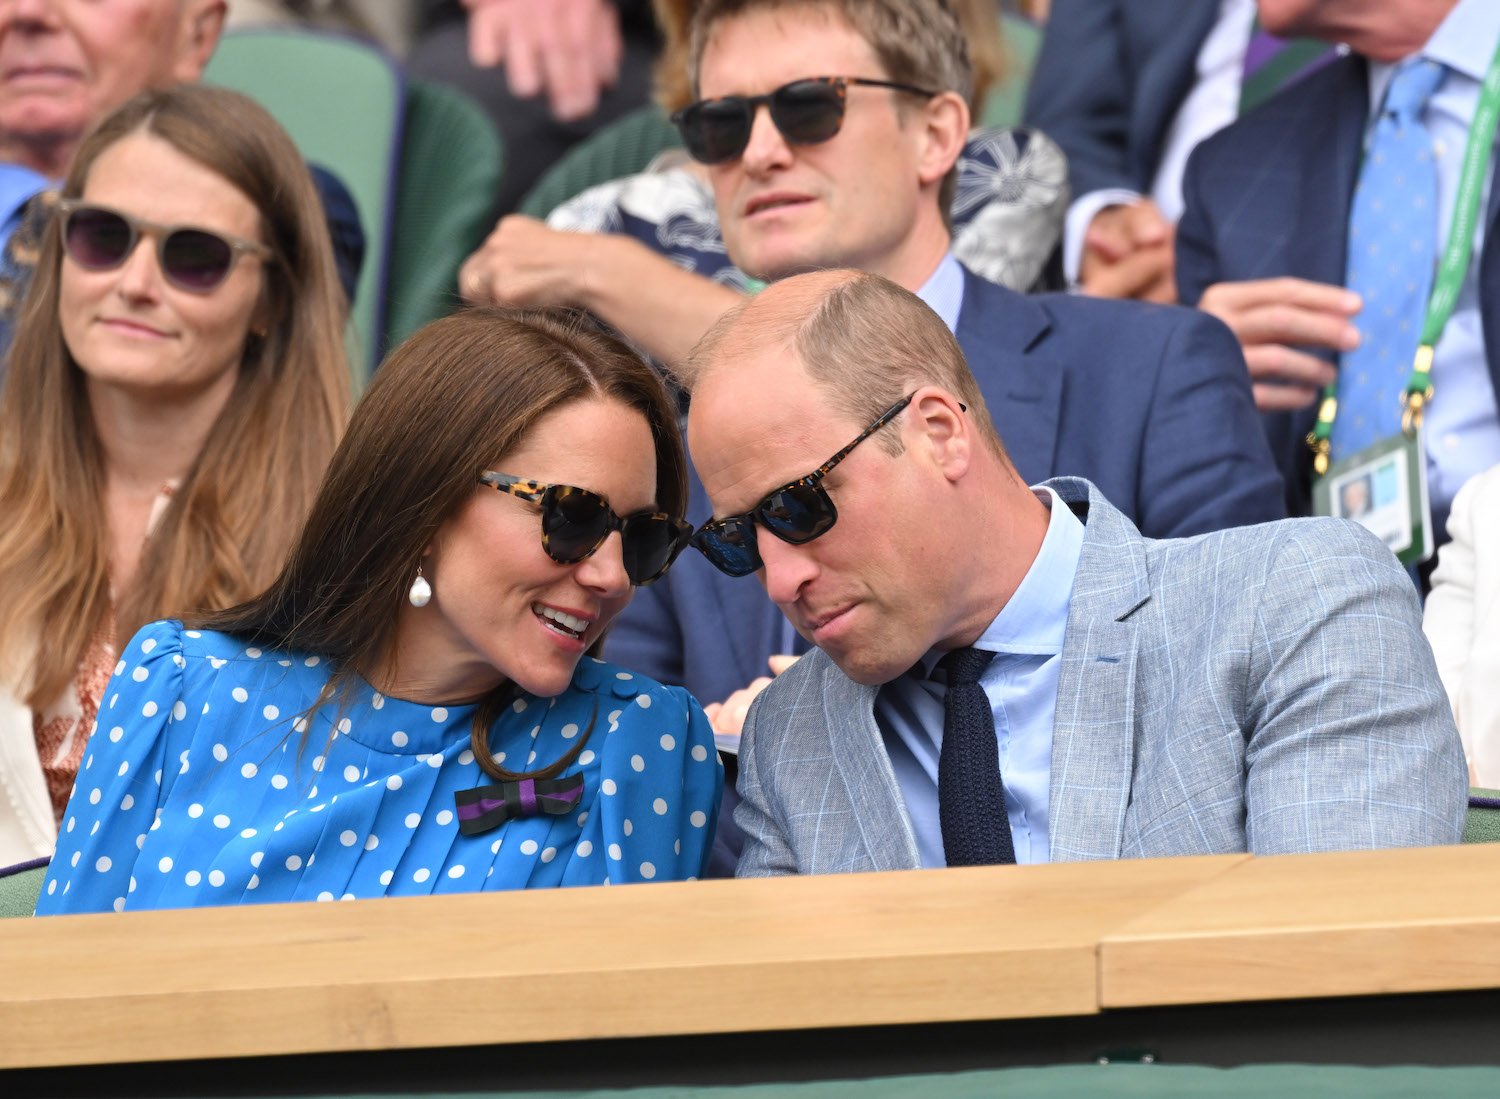 Prince William wears a light suit and Kate Middleton wears a blue polka dot dress as they lean in close to talk while watching Wimbledon tennis match